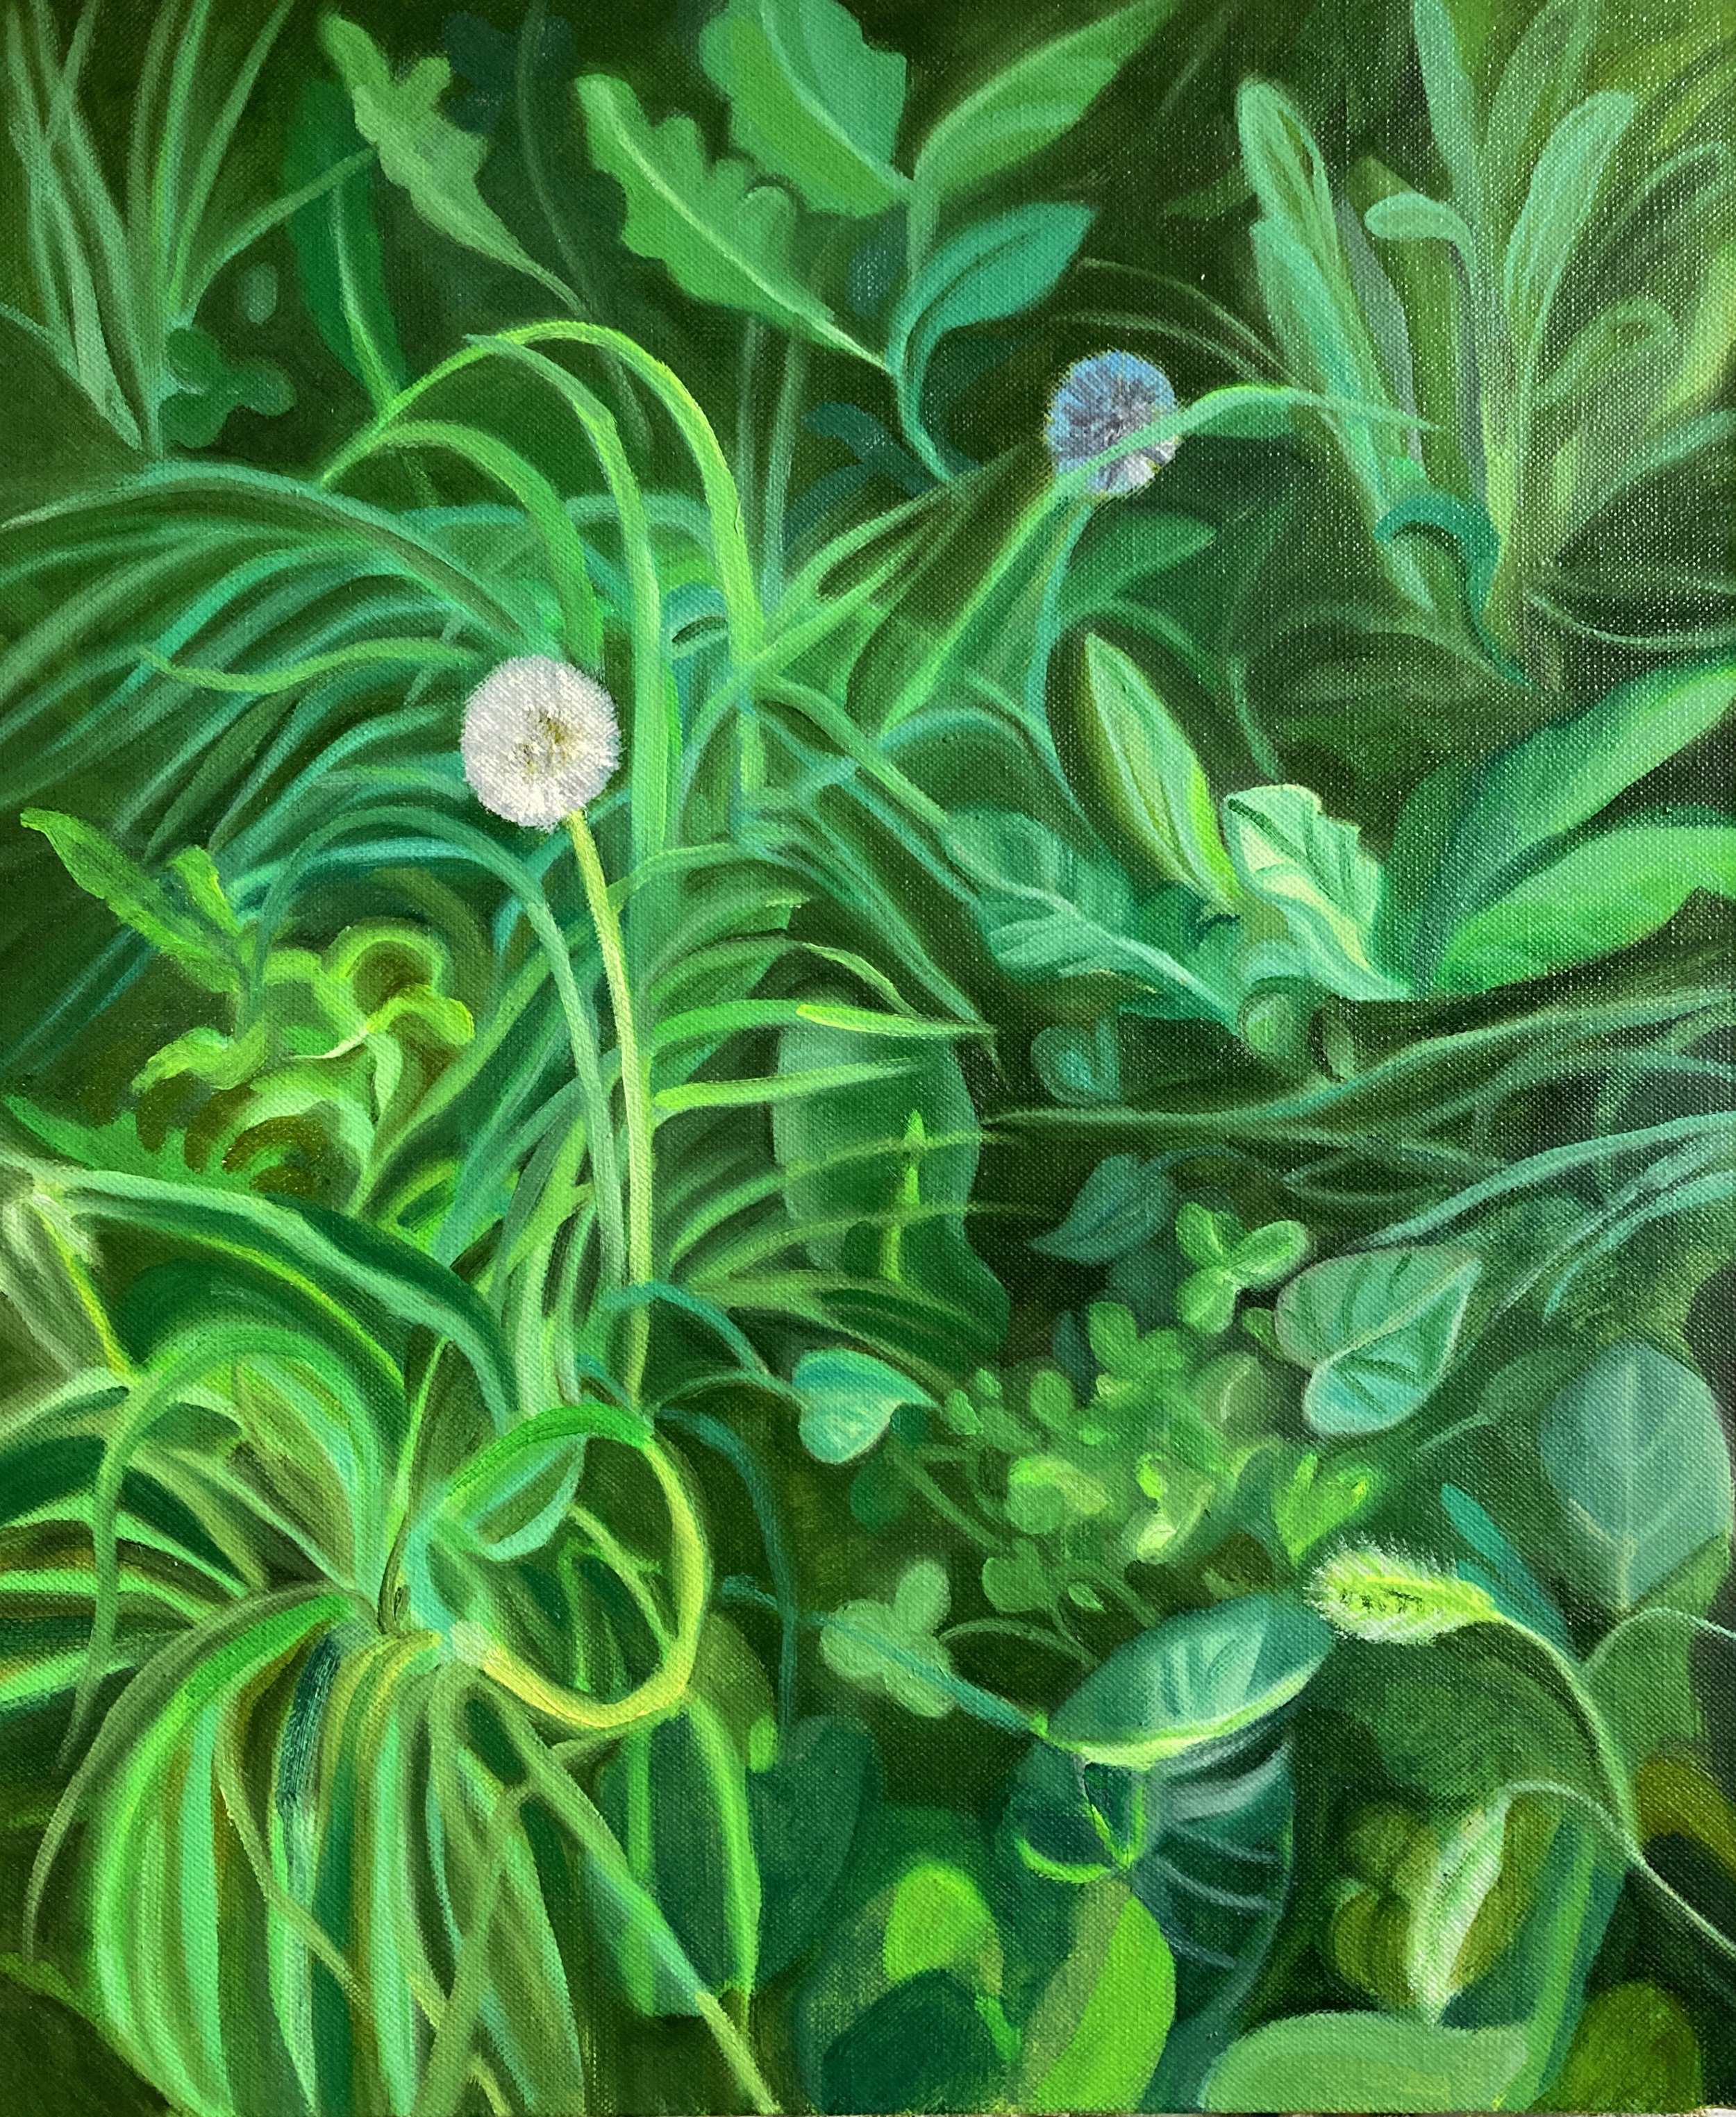  Emily Church  Fort Hamilton Parkway Weeds  2022  oil on linen  24h x 20w in 